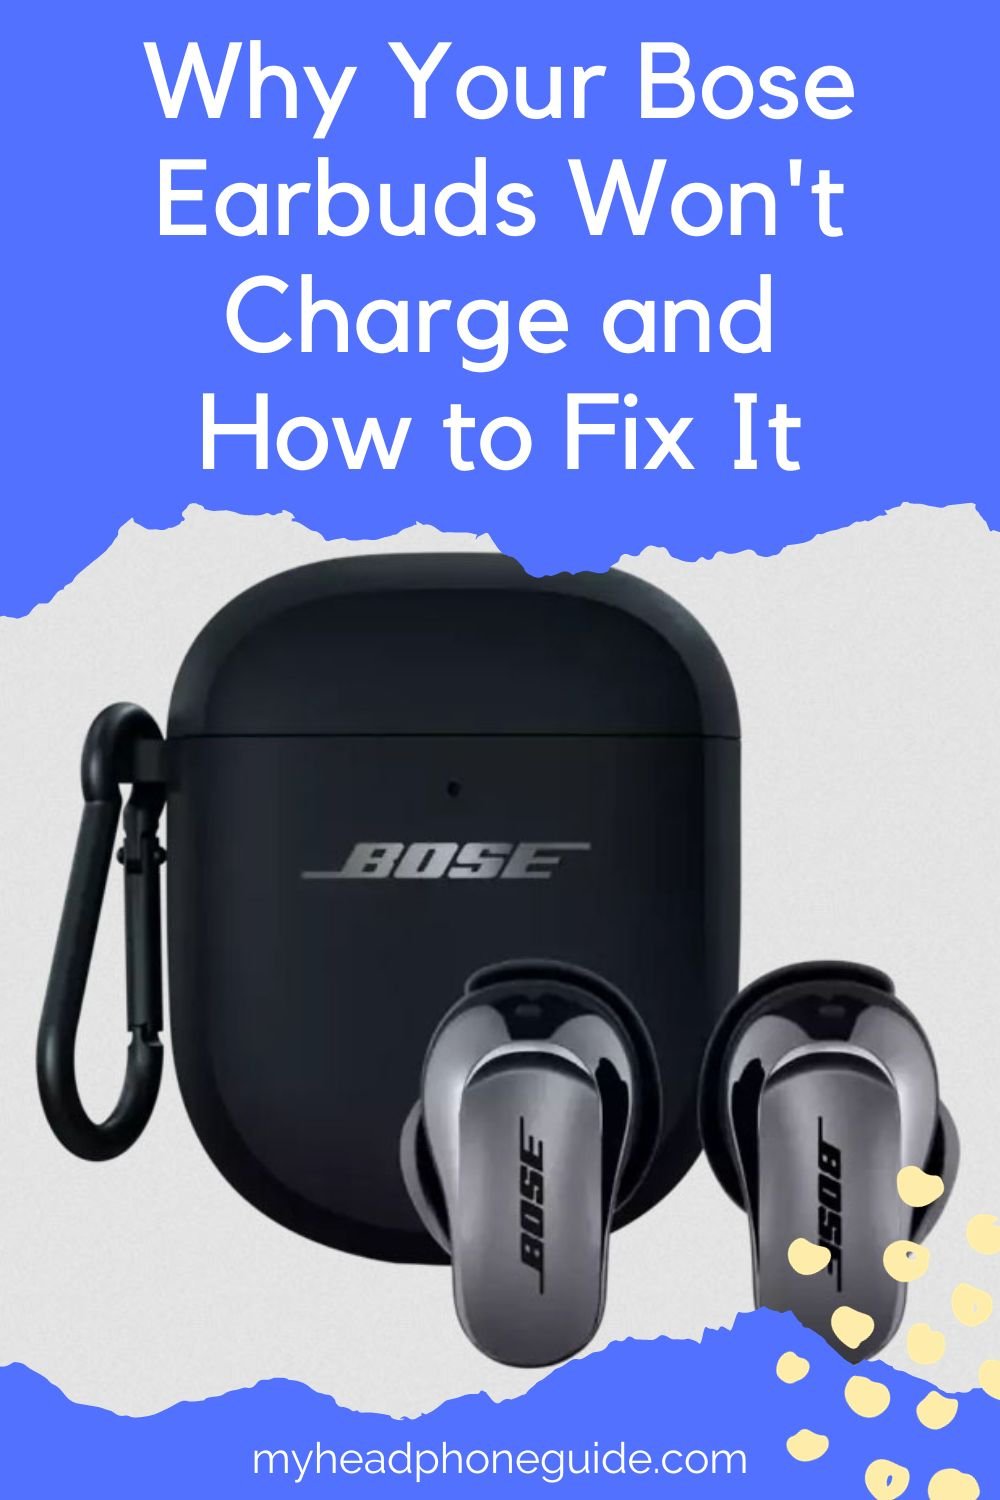 Why Your Bose Earbuds Won't Charge and How to Fix It